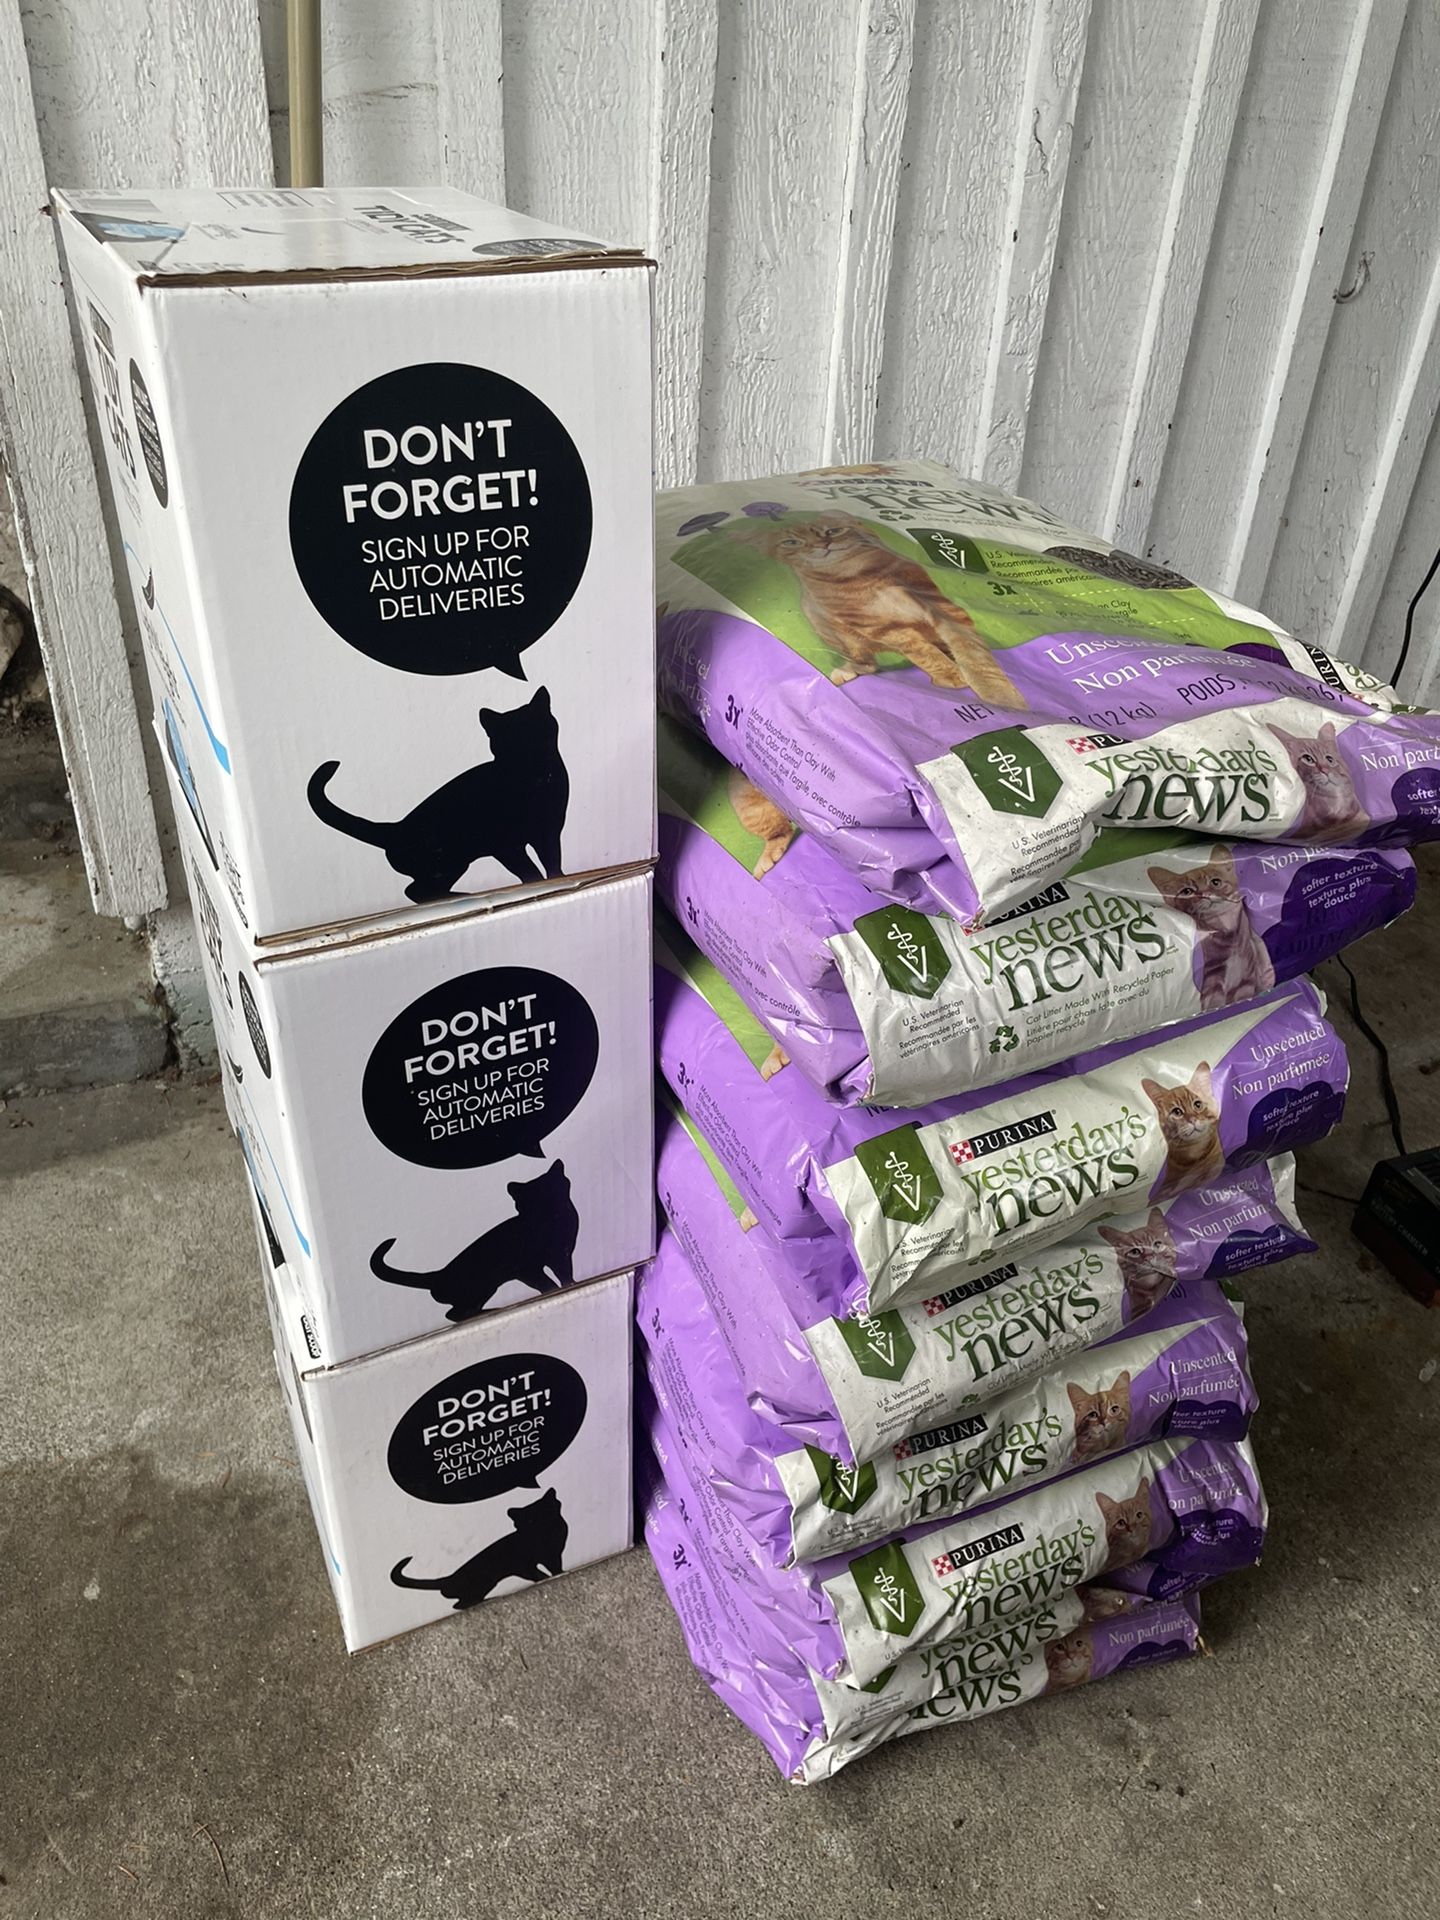 Free Kitty Litter - Paper And Lightweight Clumping